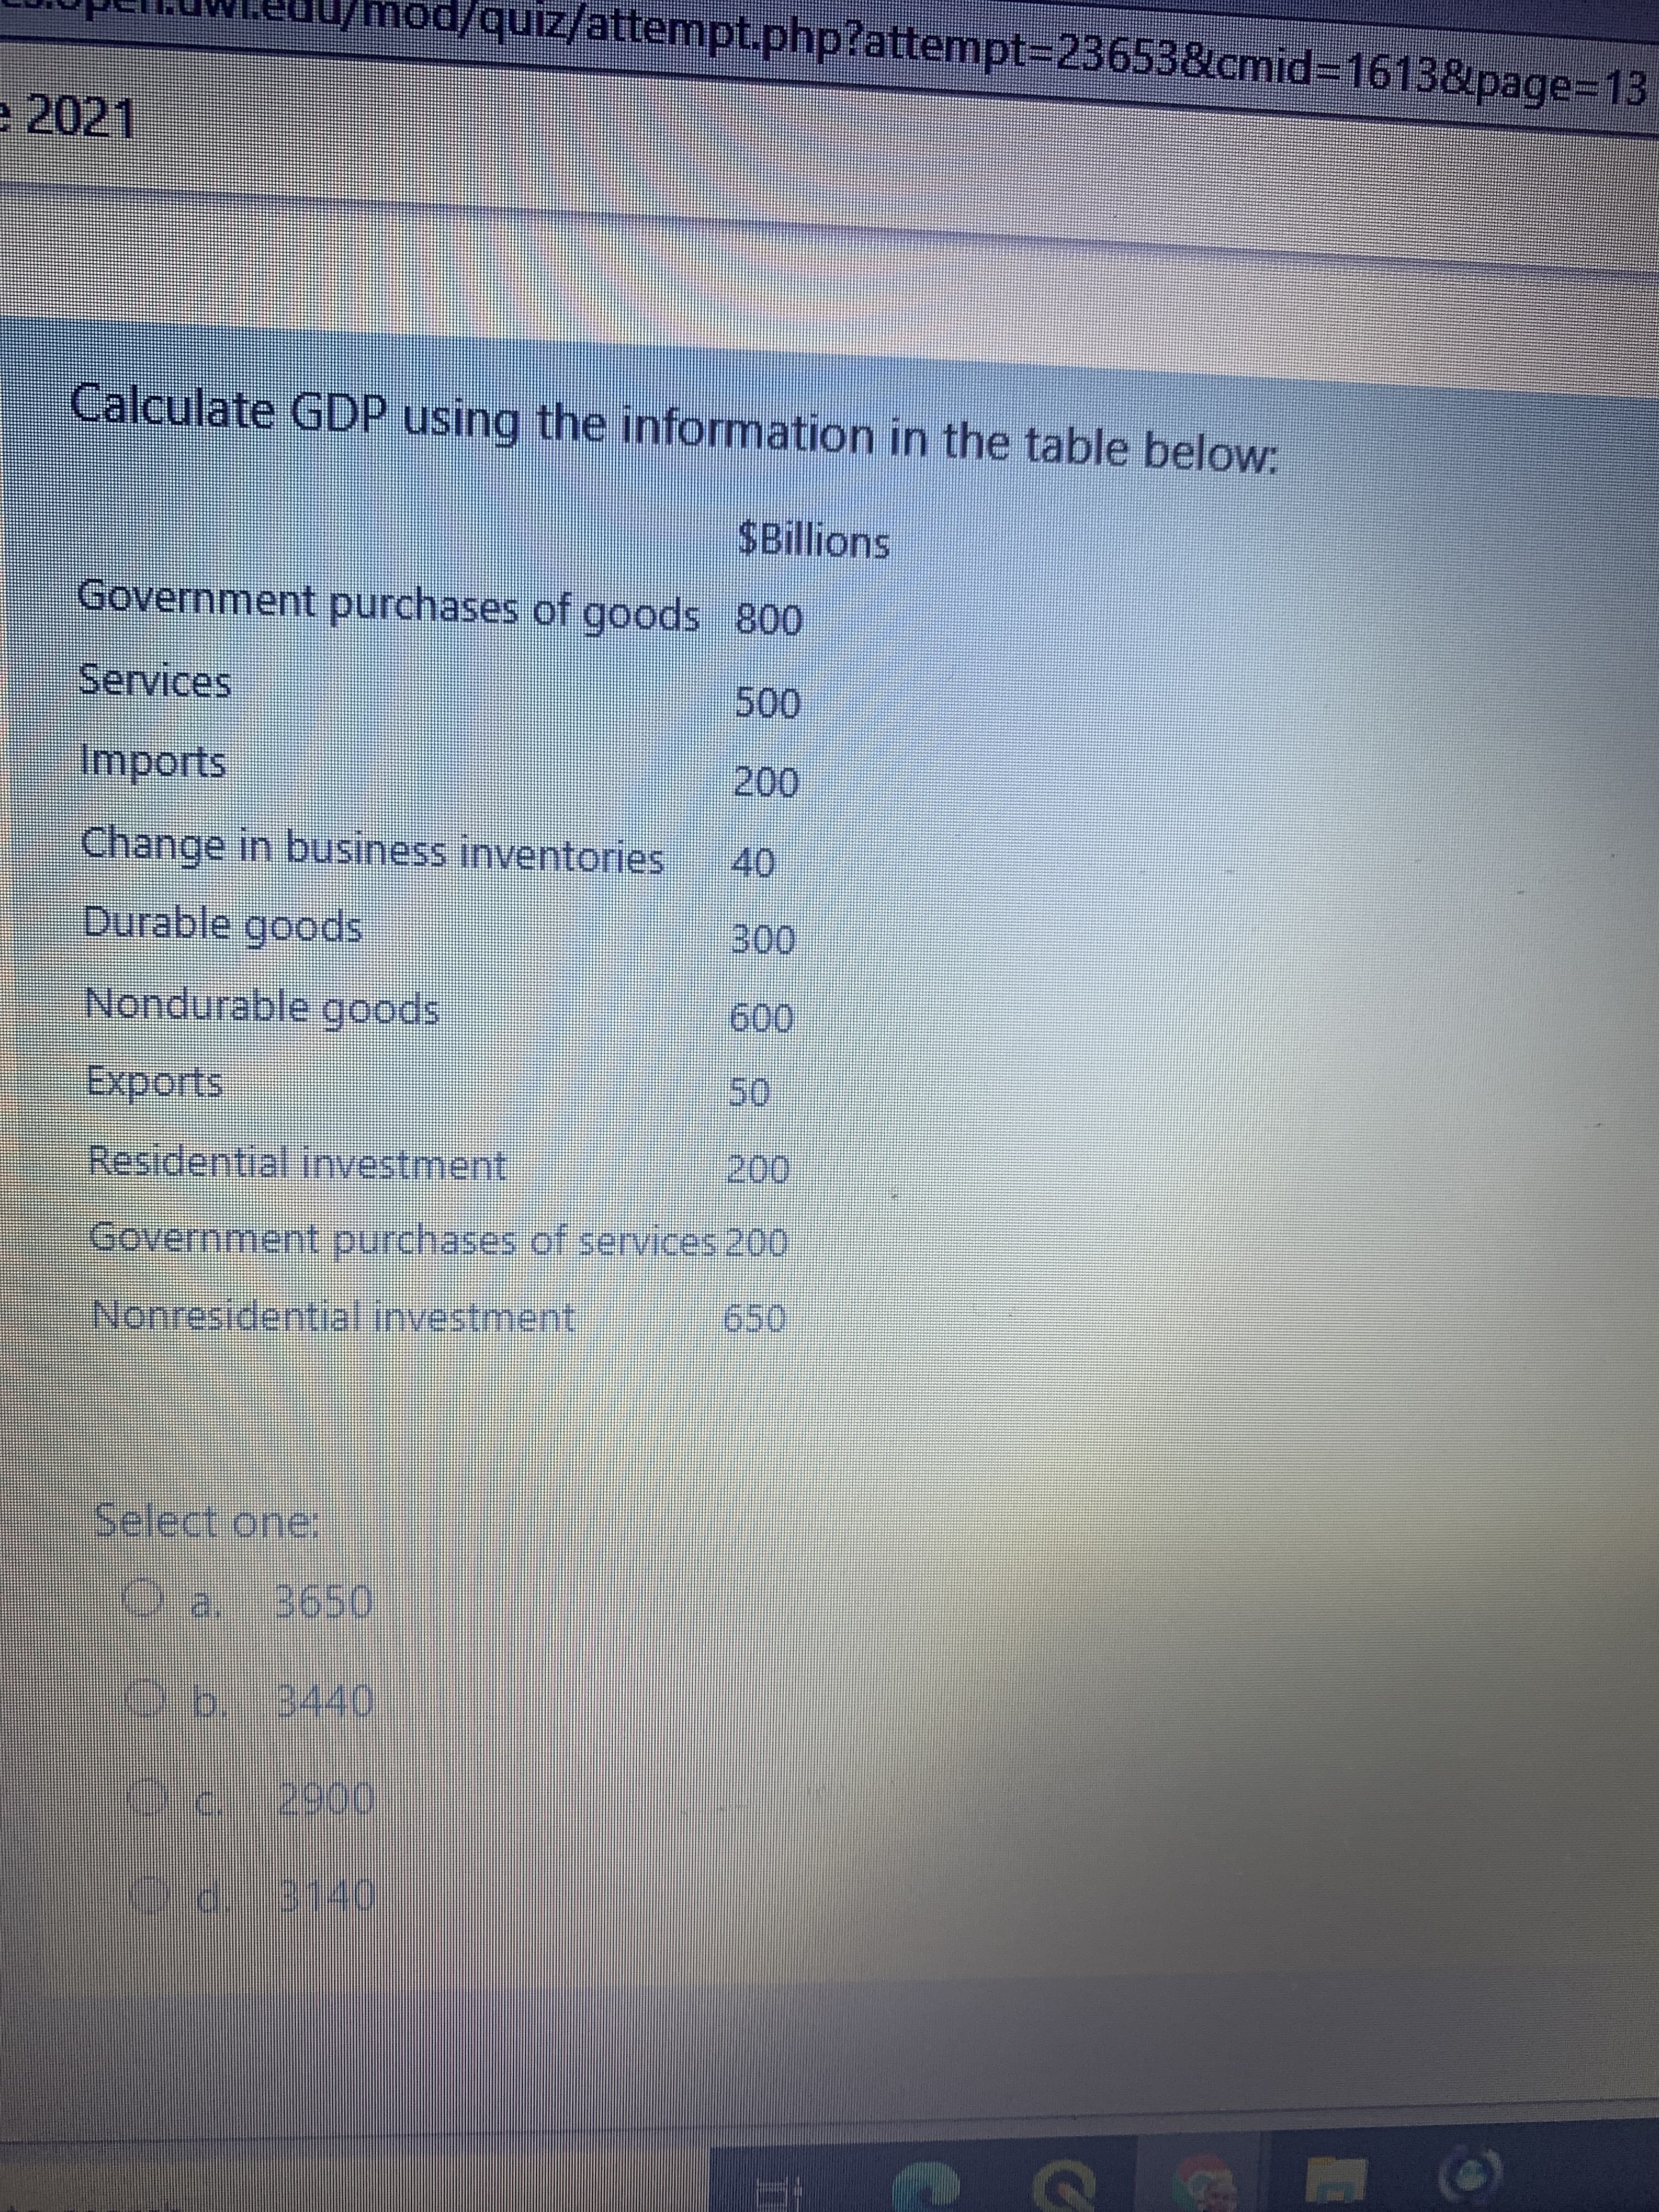 mod/quiz/attempt.php?attempt%3D23653&cmid3D16138page3D13
e 2021
Calculate GDP using the information in the table below:
$Billions
Government purchases of goods 800
Services
Imports
00.
Change in business inventories
40
Durable goods
Nondurable goods
009
Residential investment
00.
Government purchases of services 200
Nonresidential investment
Select one:
O a. 3650
O b. 3440
Do3140
